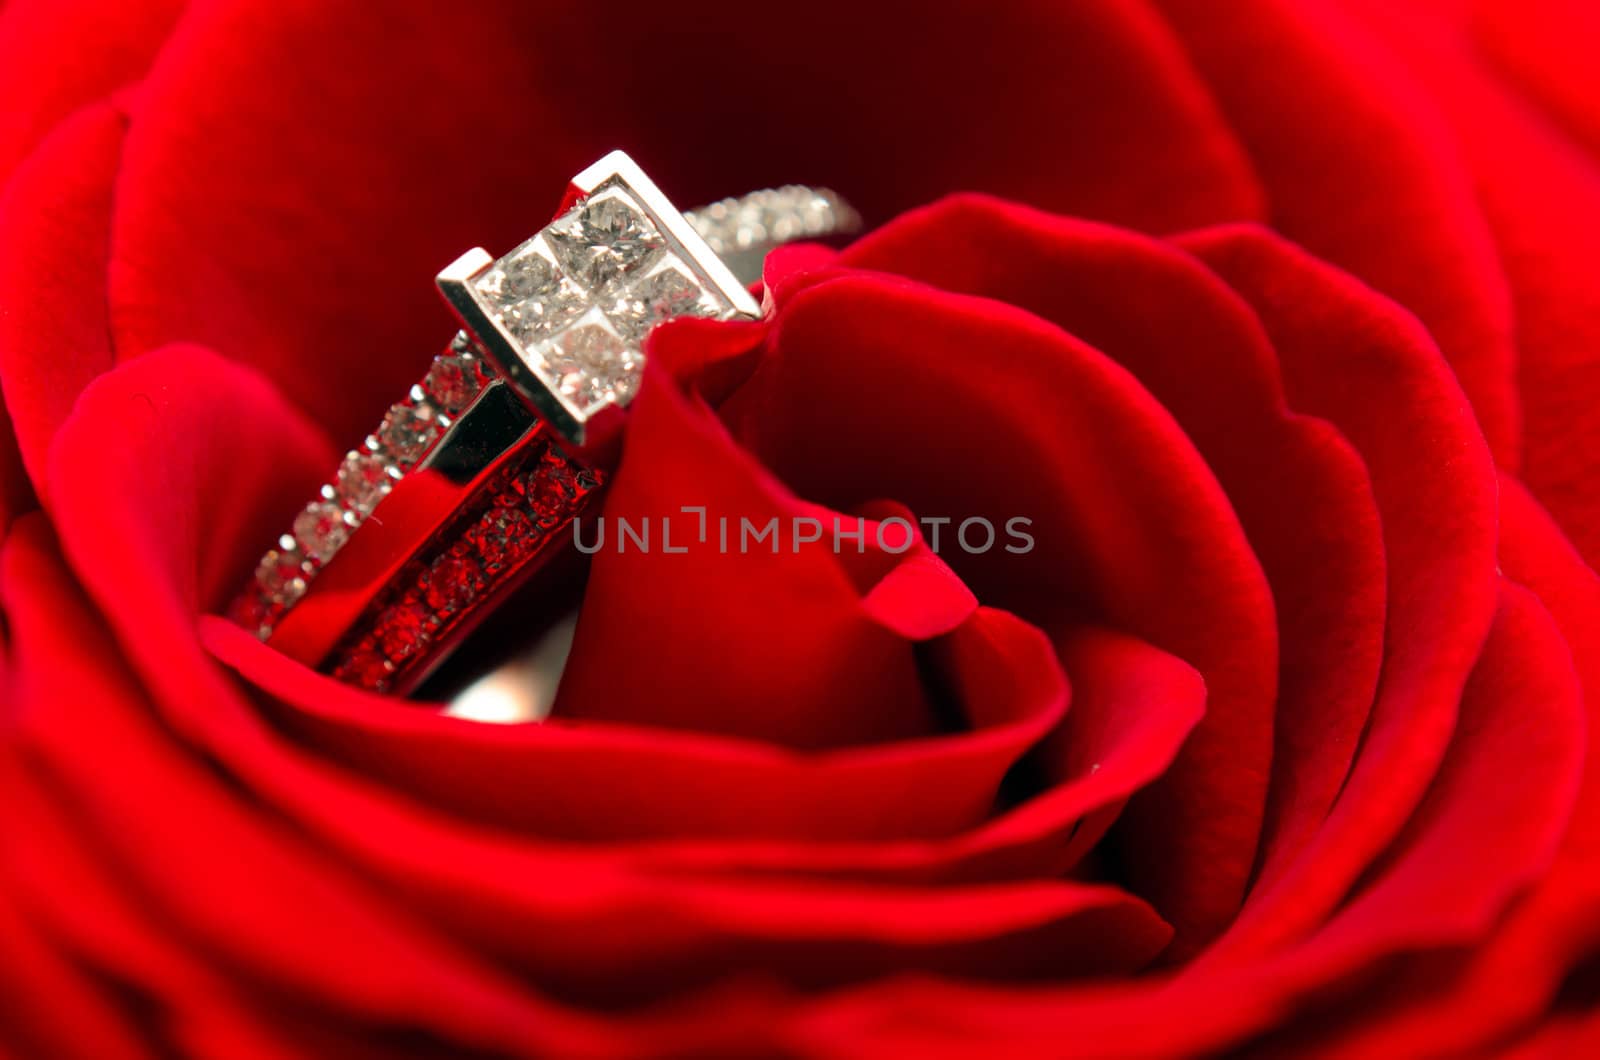 Macro view of a diamond engagement ring in a red rose